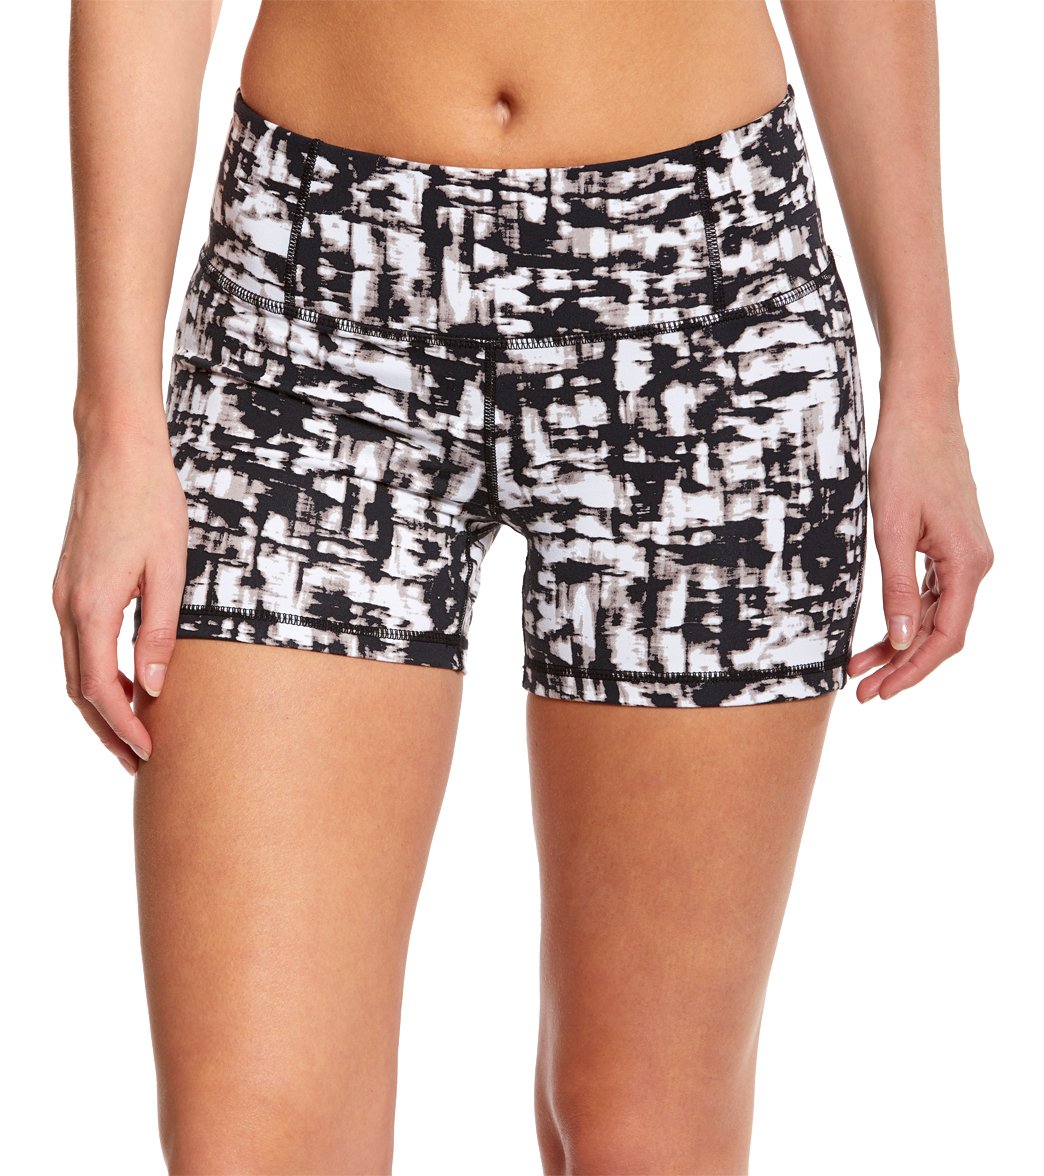 Body Glove Active Women's Print Get Shorty Fitness Short at SwimOutlet ...